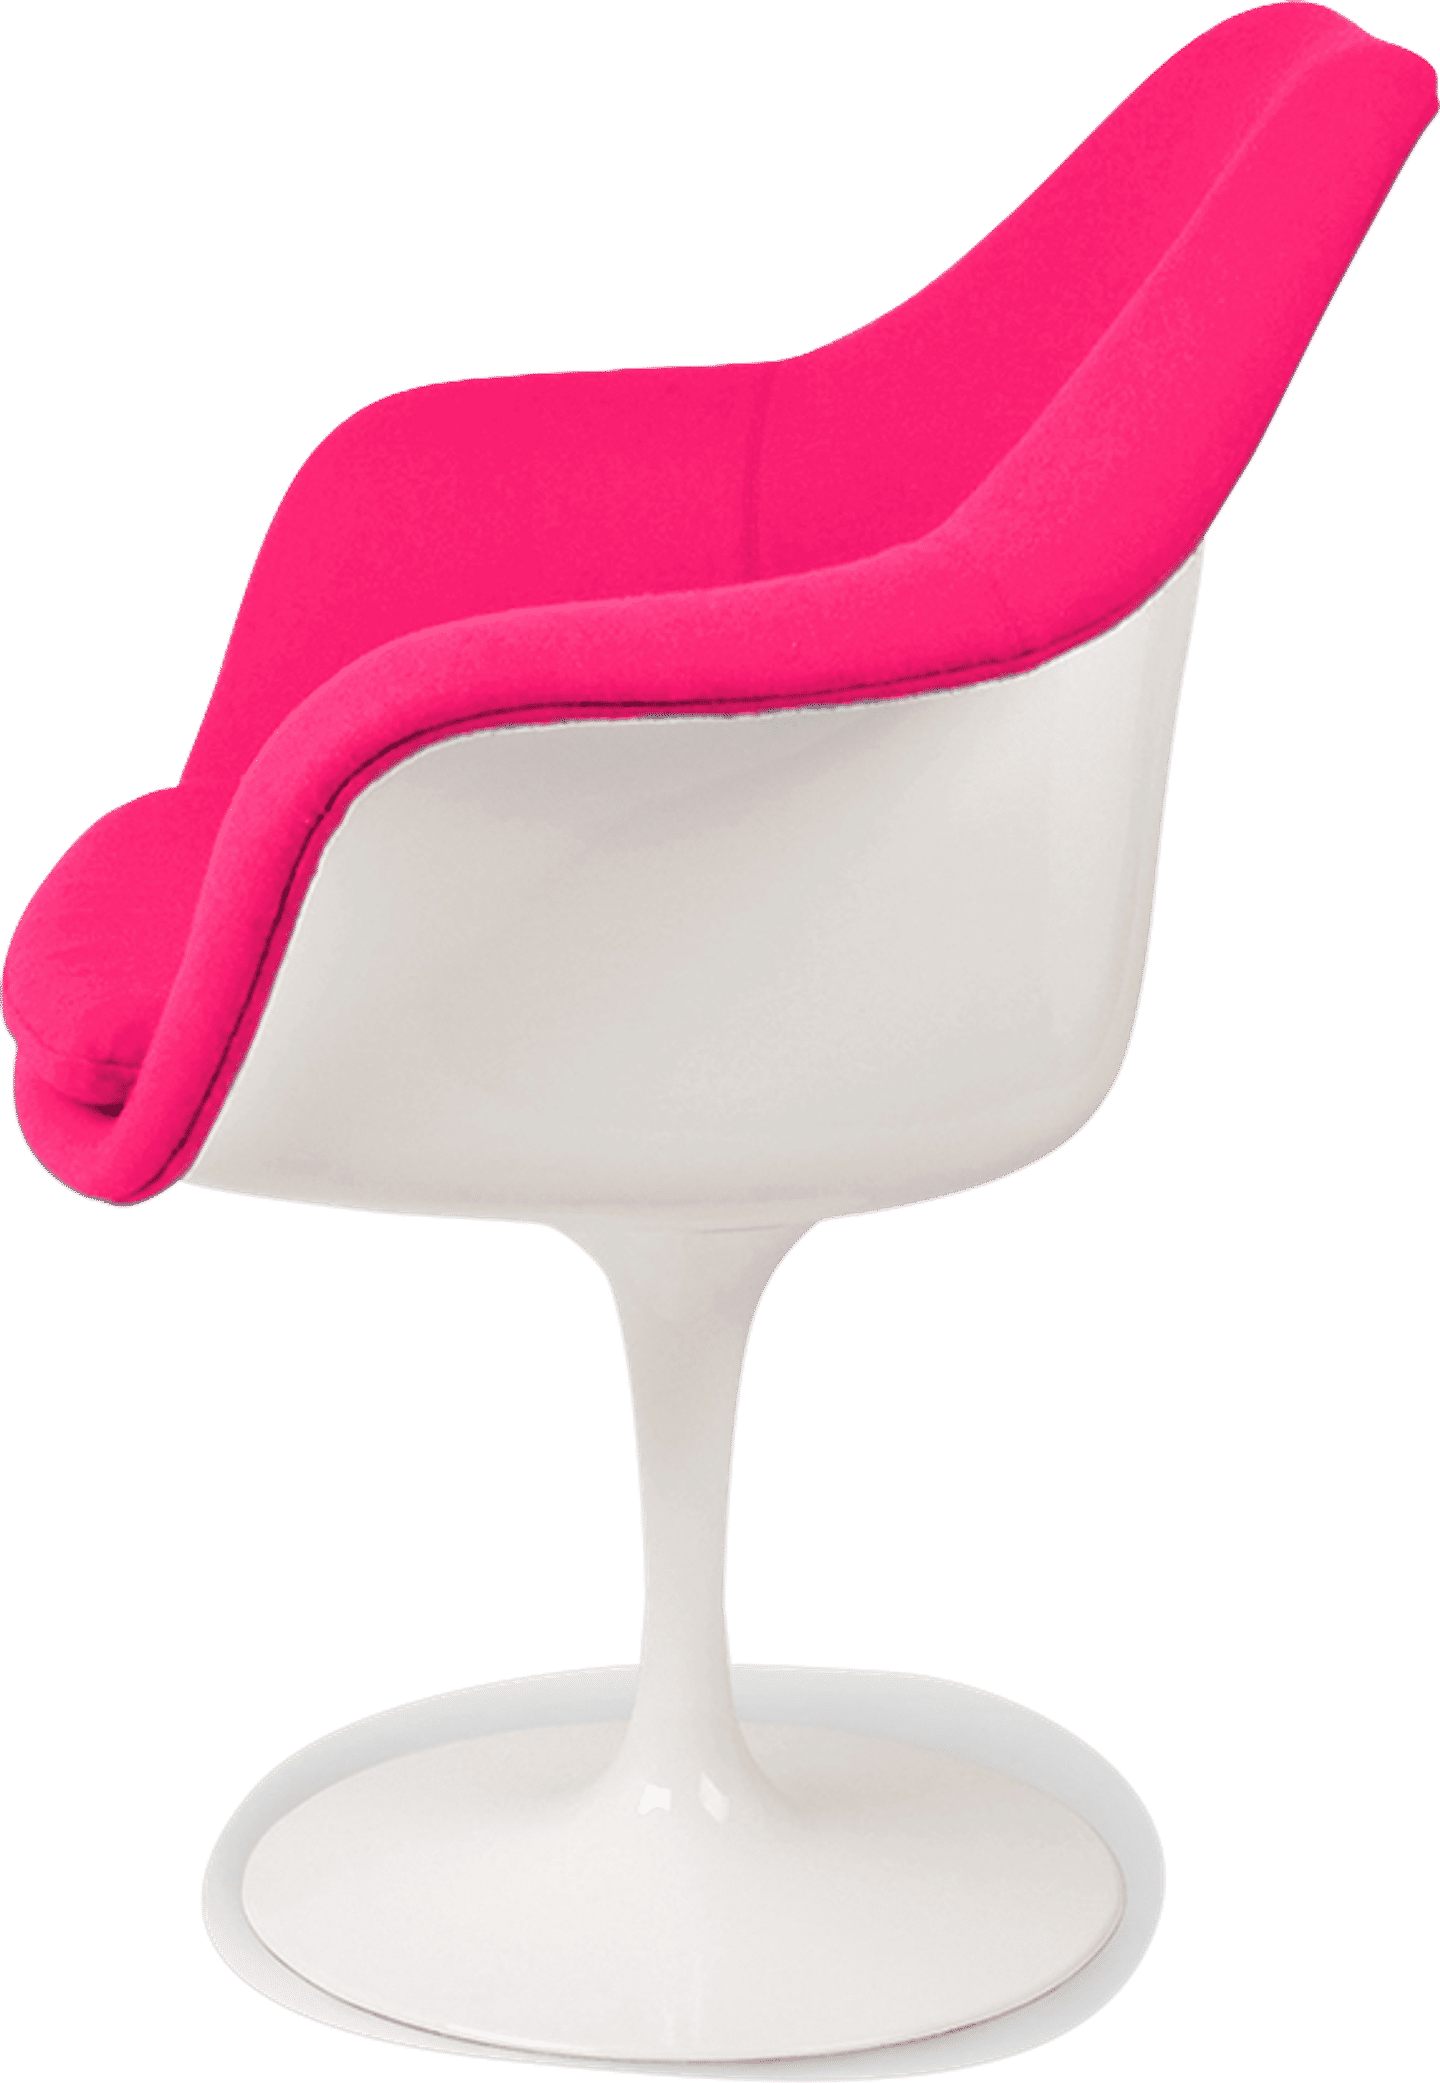 Chaise Tulip Carver Pink/White image.